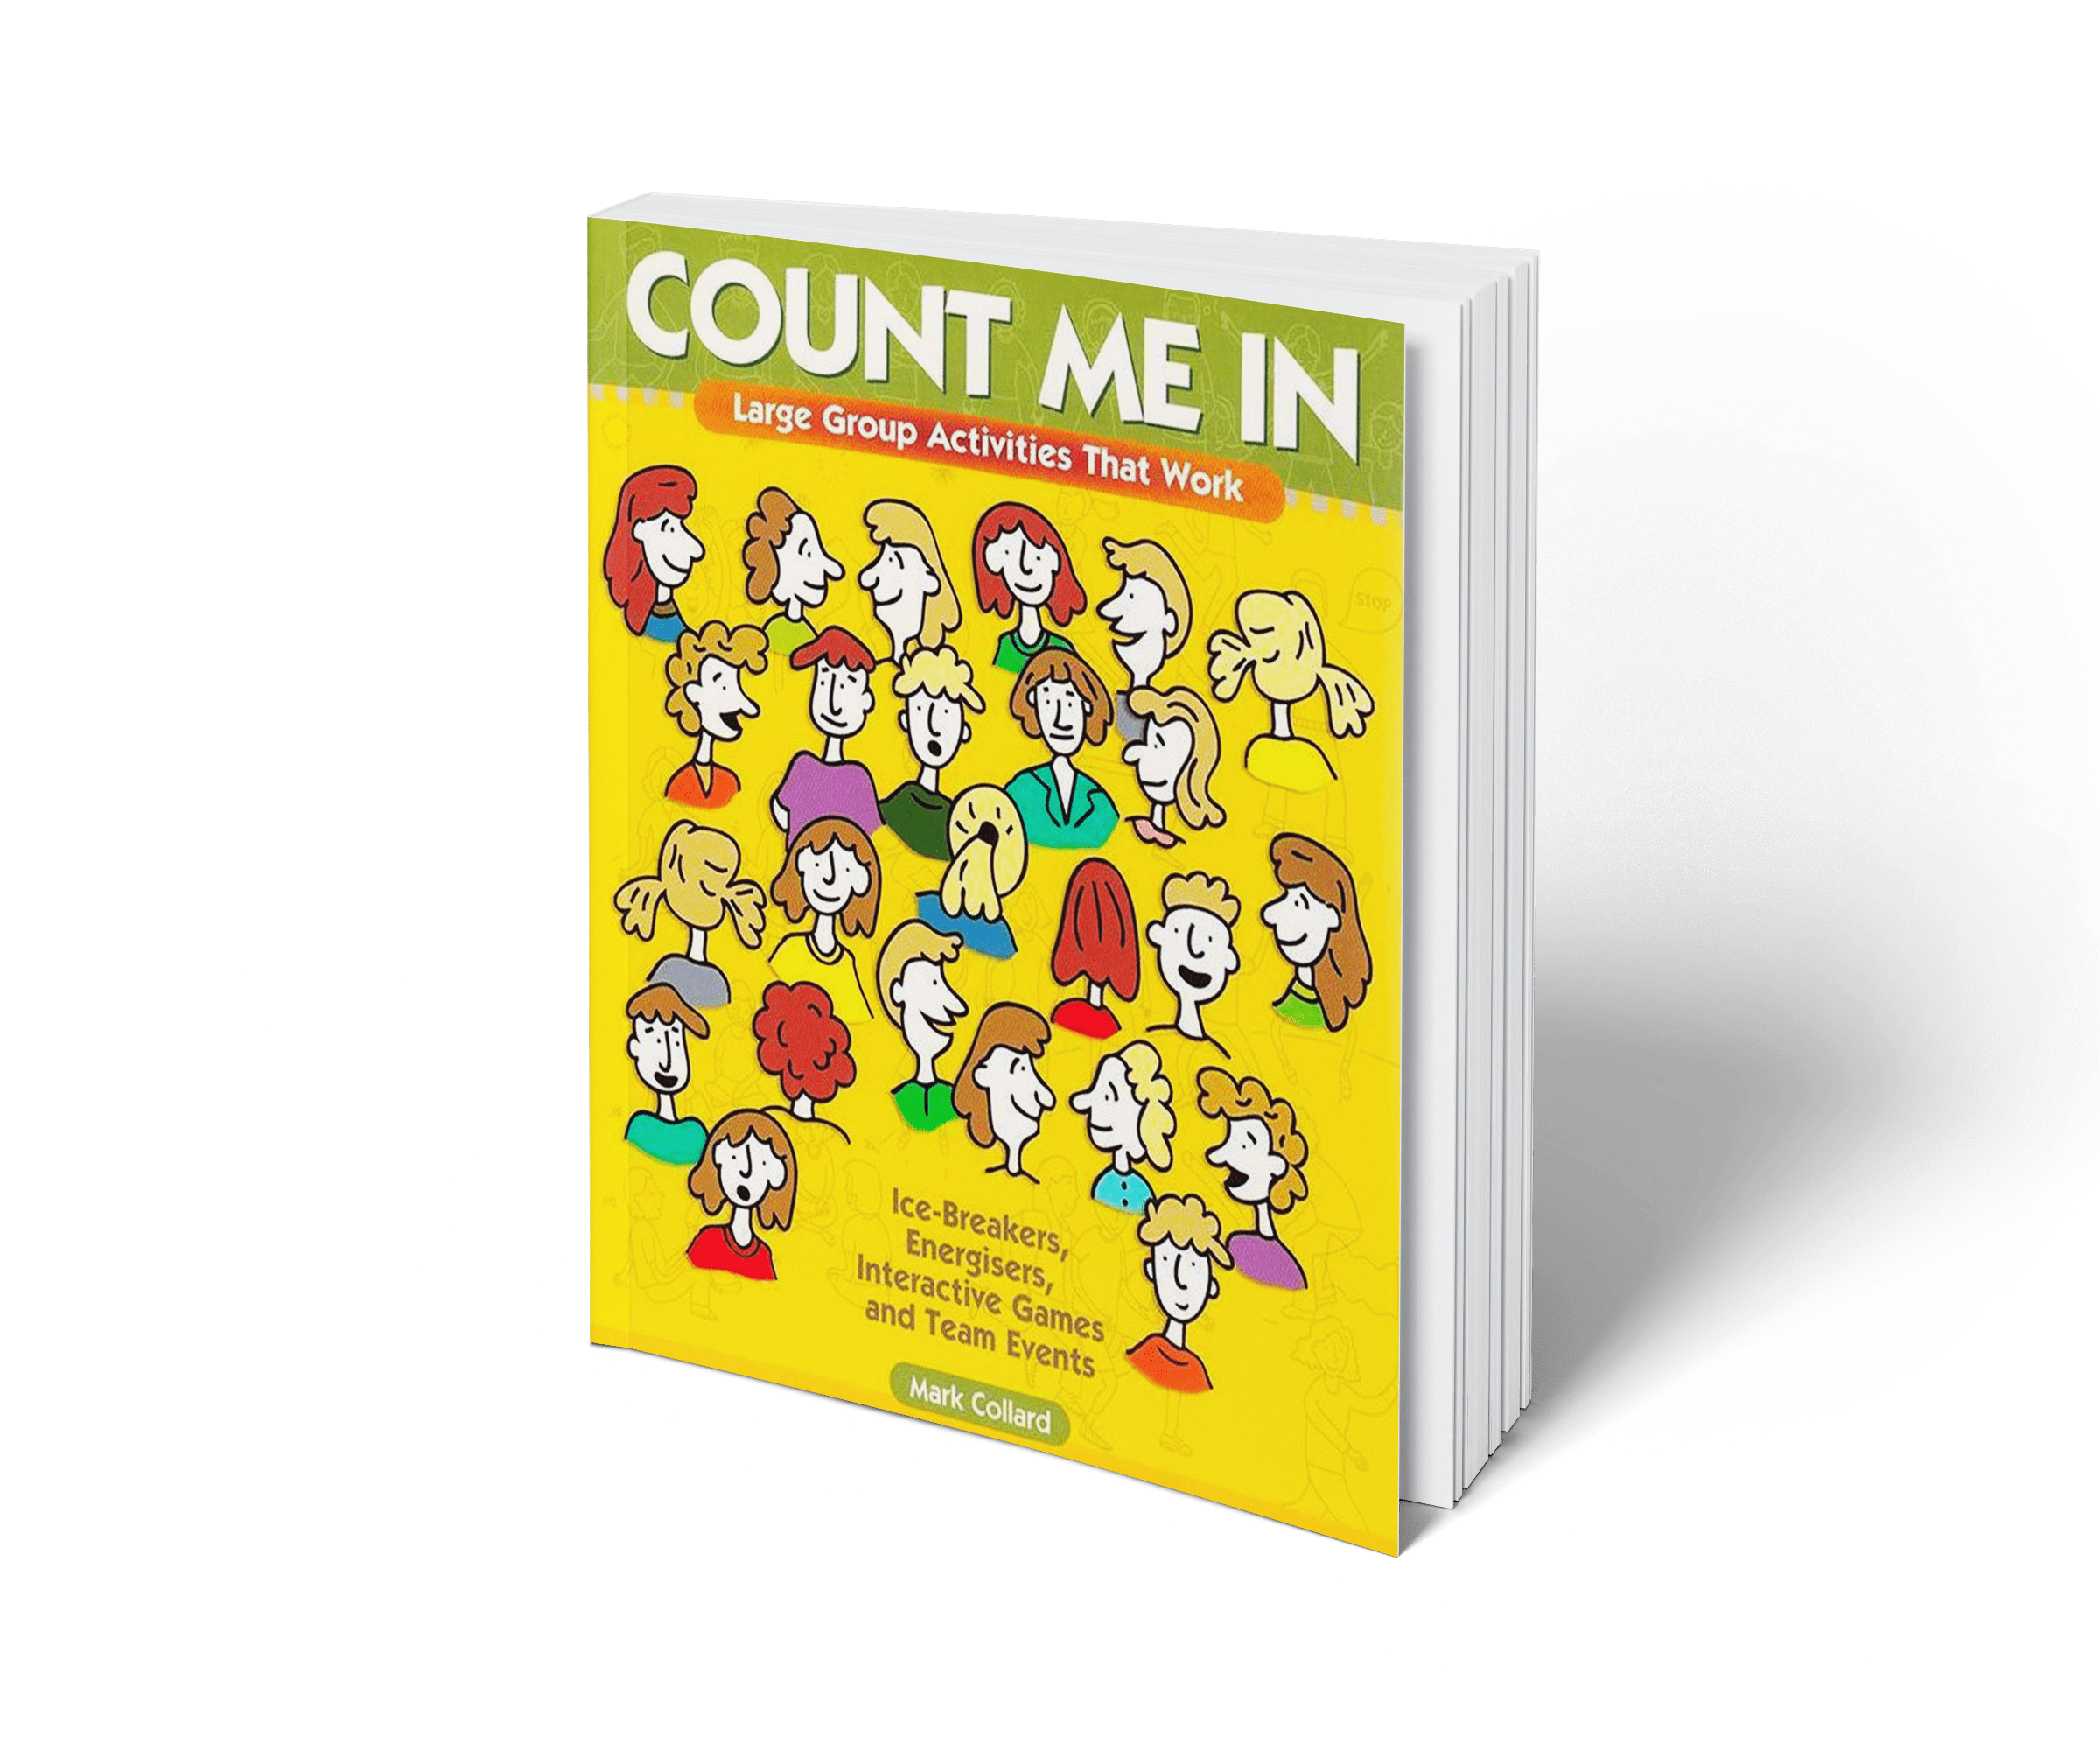 Group　Book　In　of　Count　Large　That　Me　Games　Work